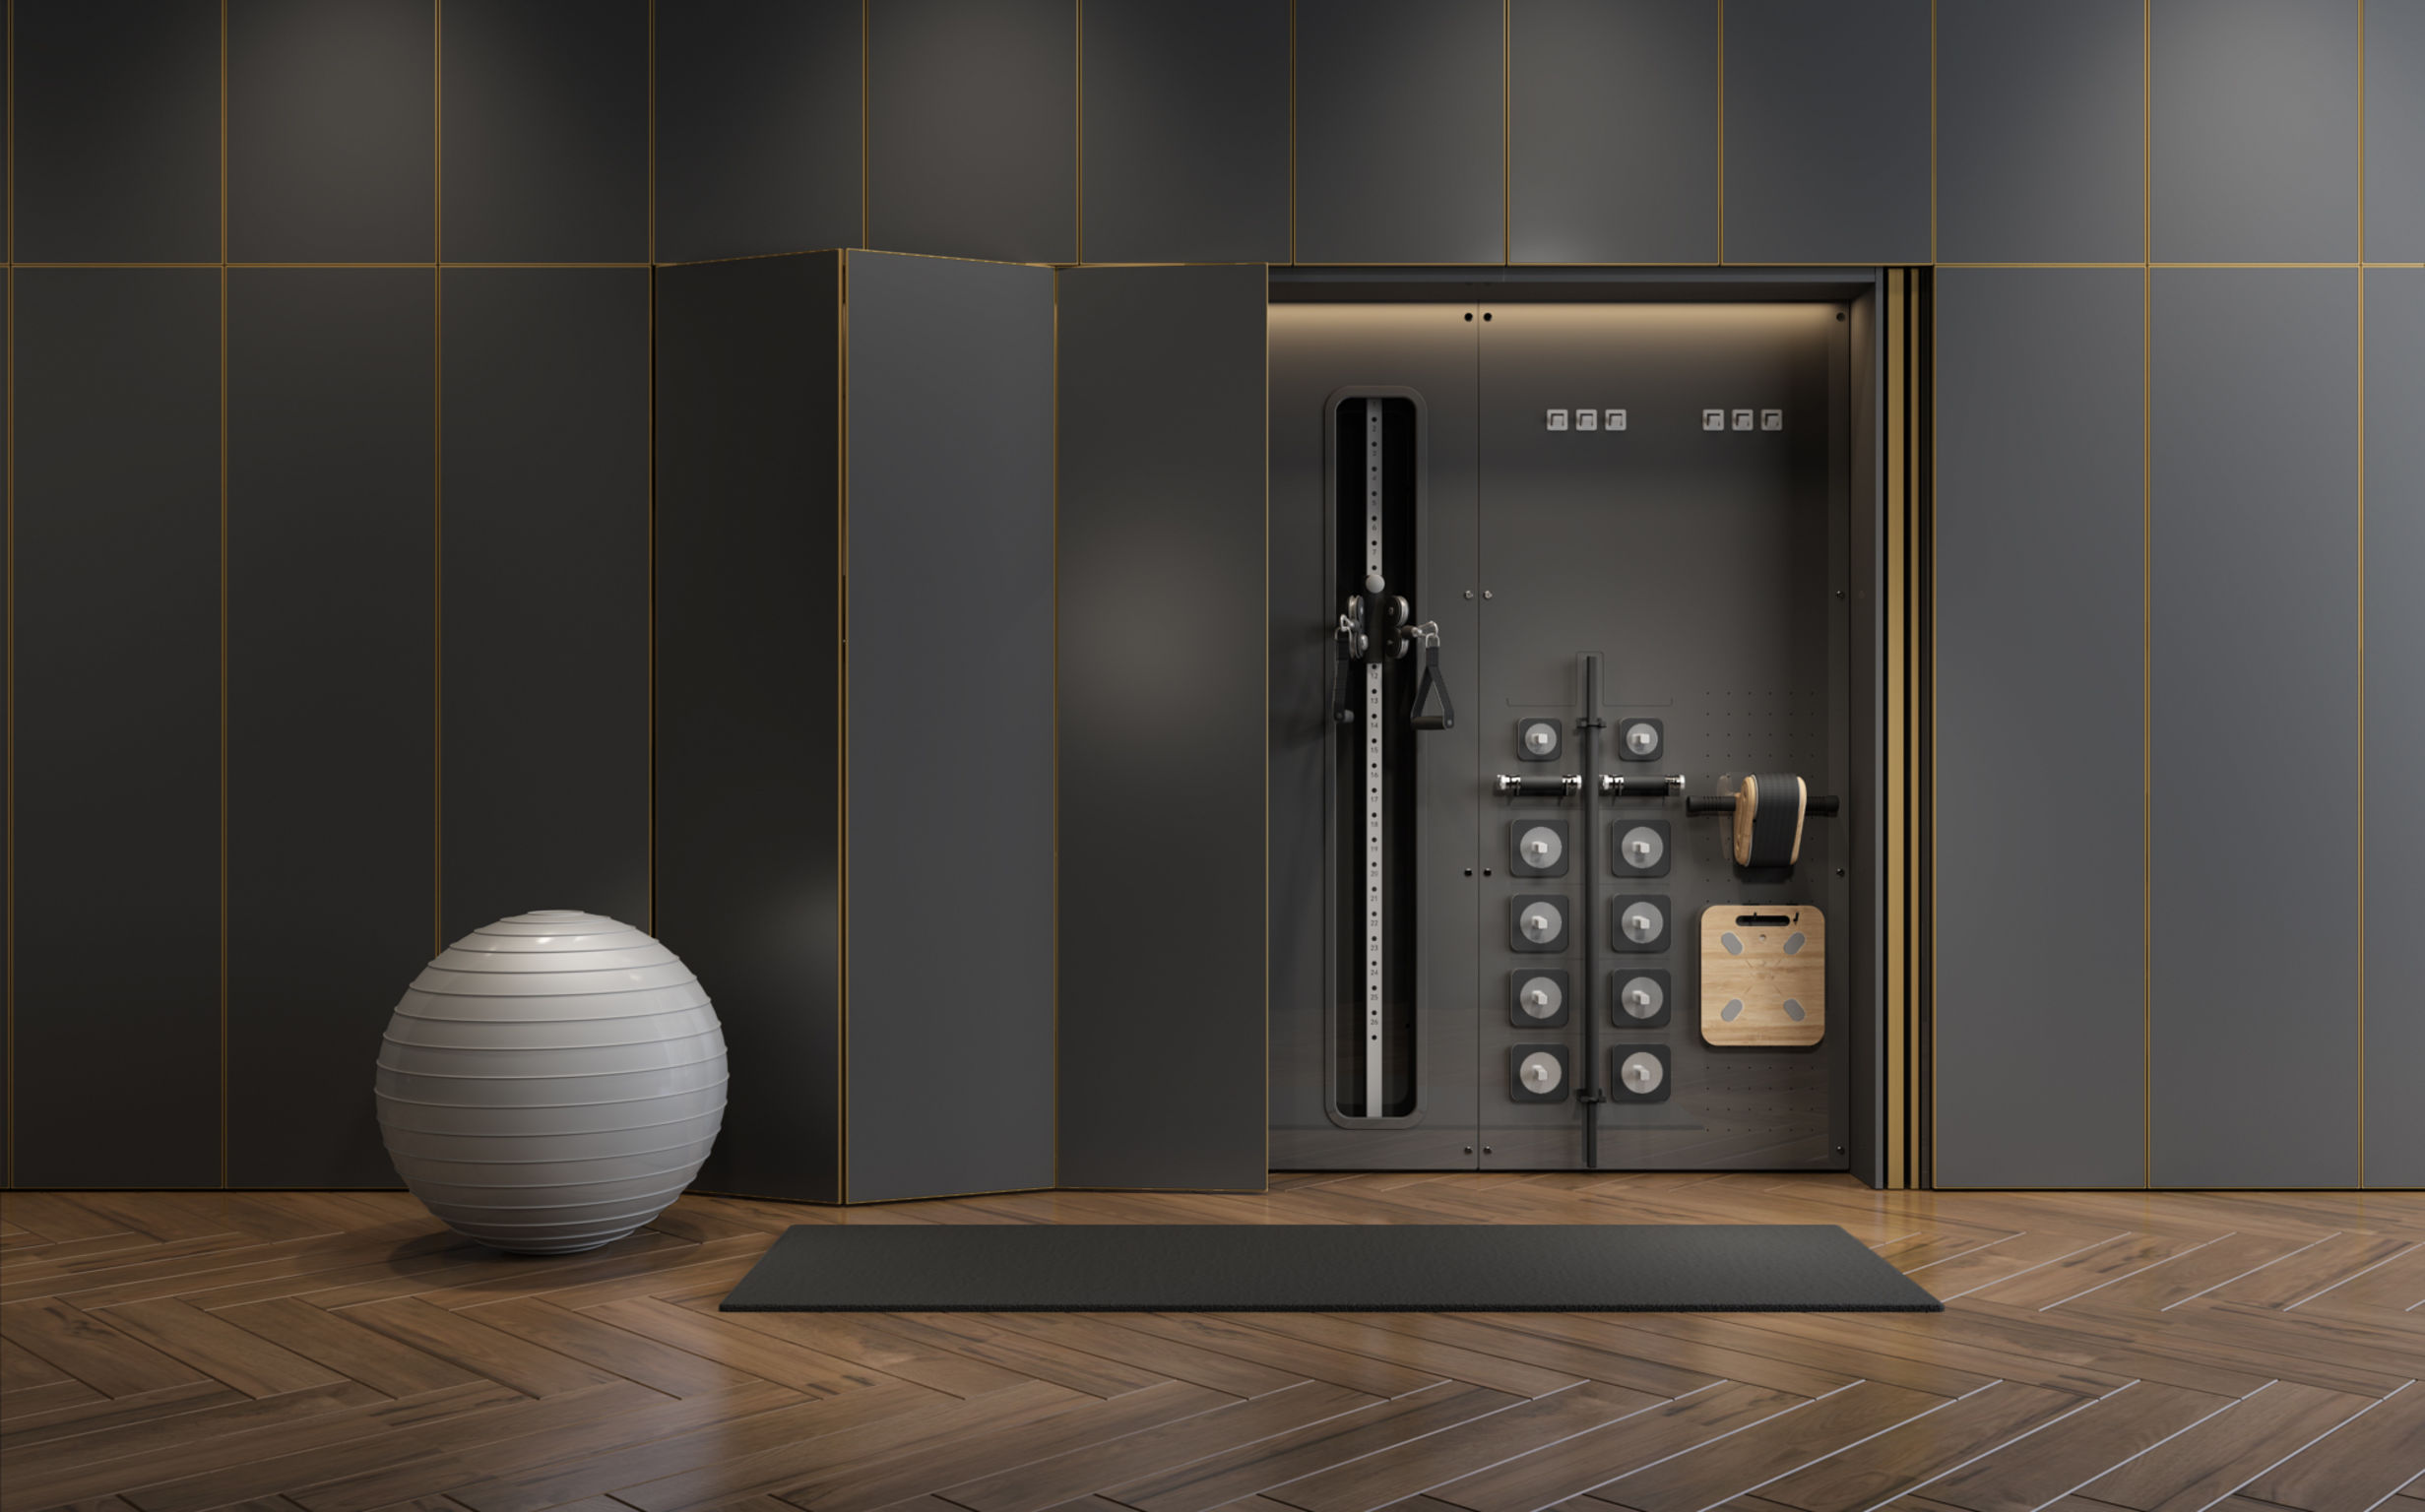 MODULAR HIGHLY-INTERGRATED HOME FITNESS SYSTEM